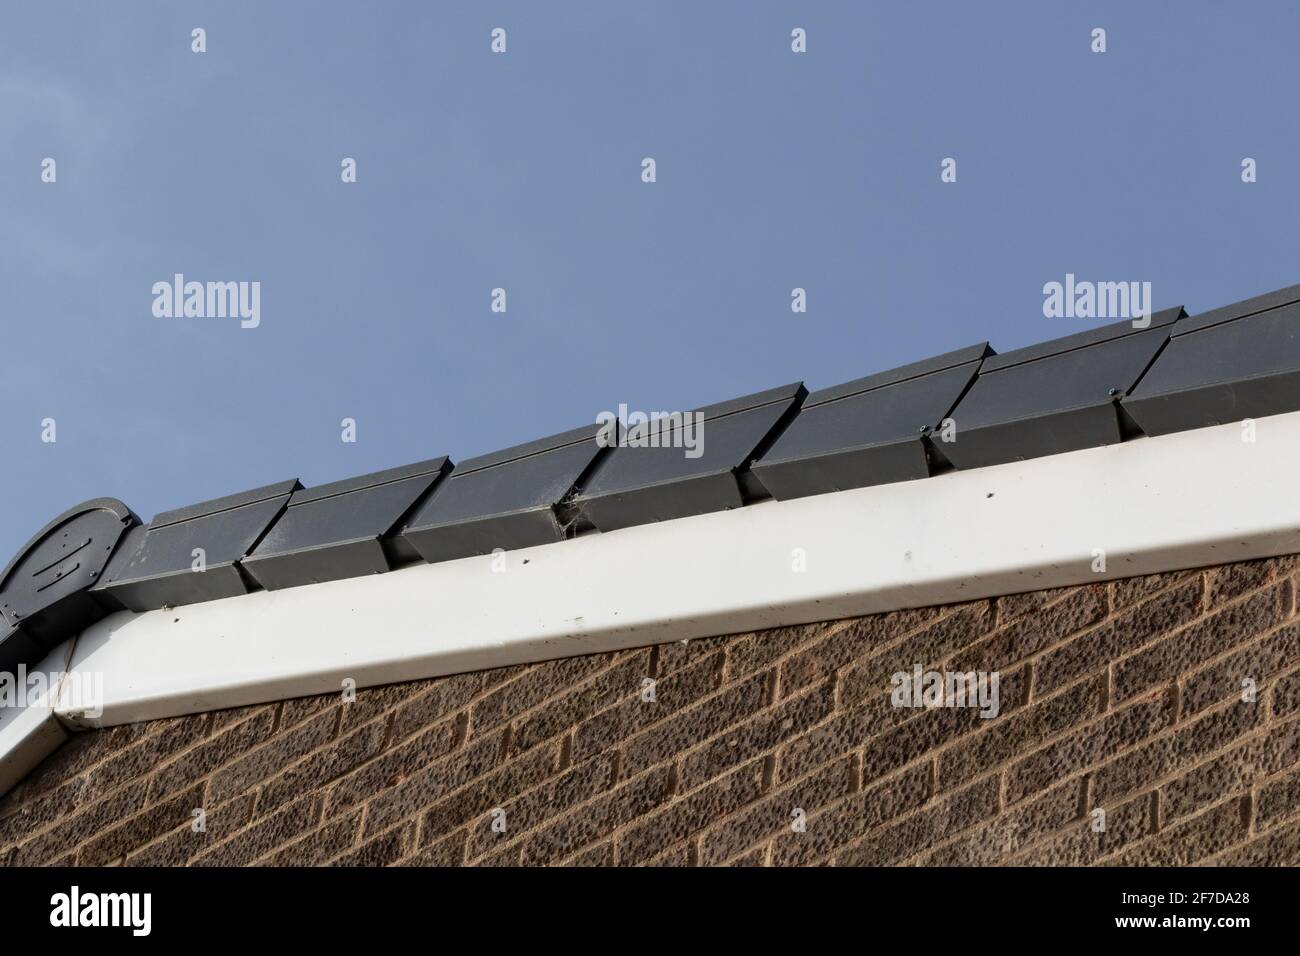 A dry verge roof system on the gable end of a house. Stock Photo